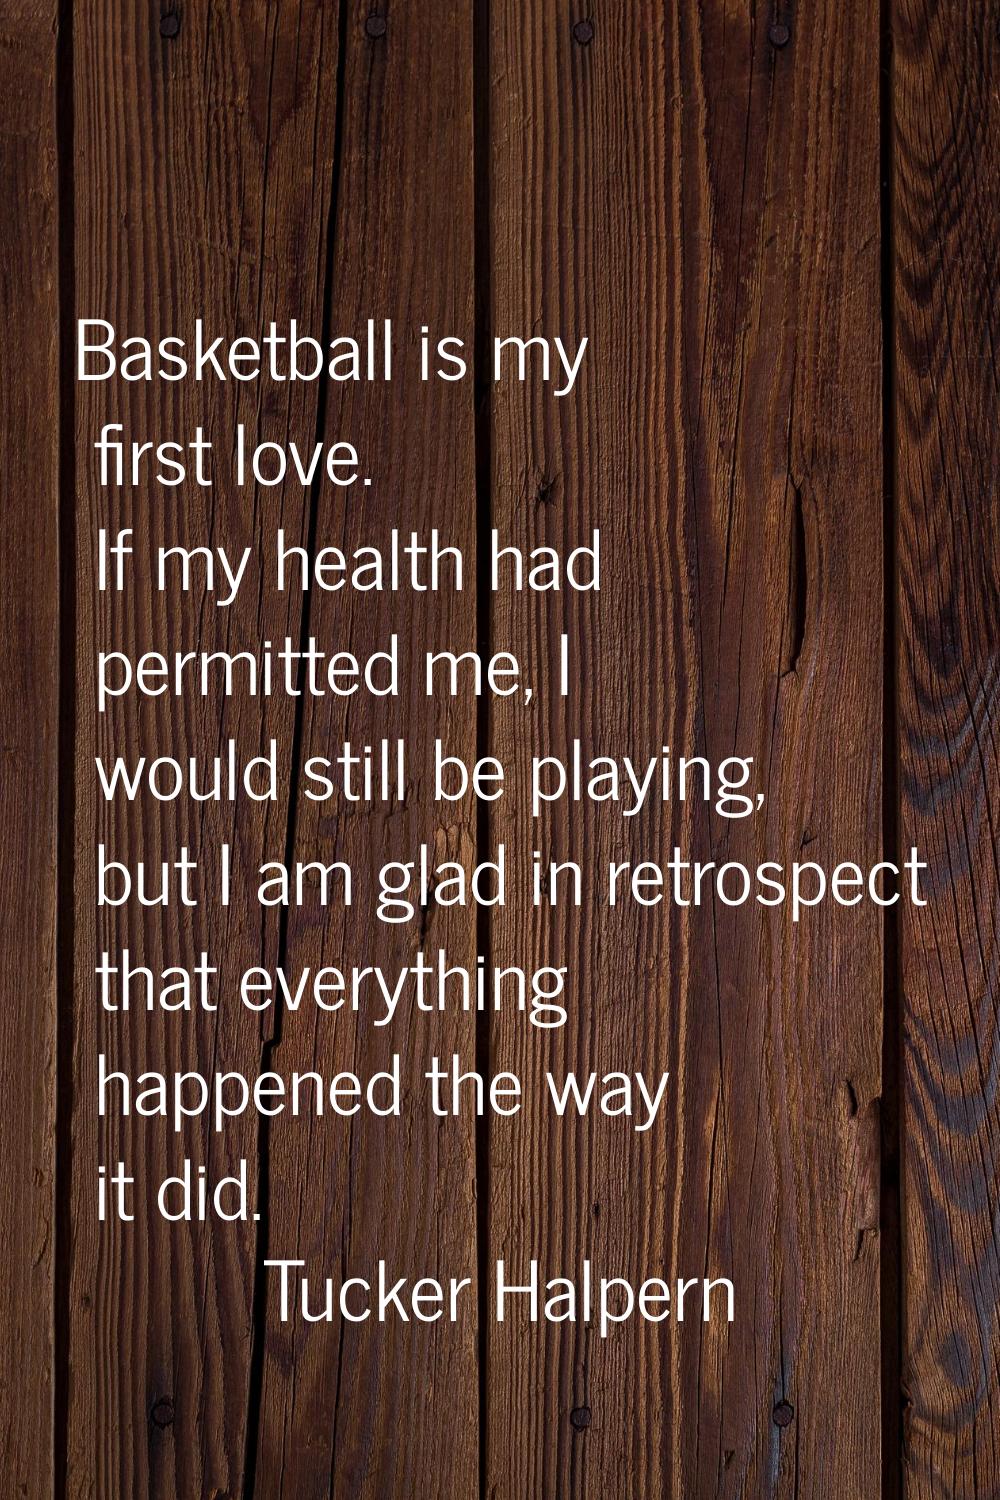 Basketball is my first love. If my health had permitted me, I would still be playing, but I am glad